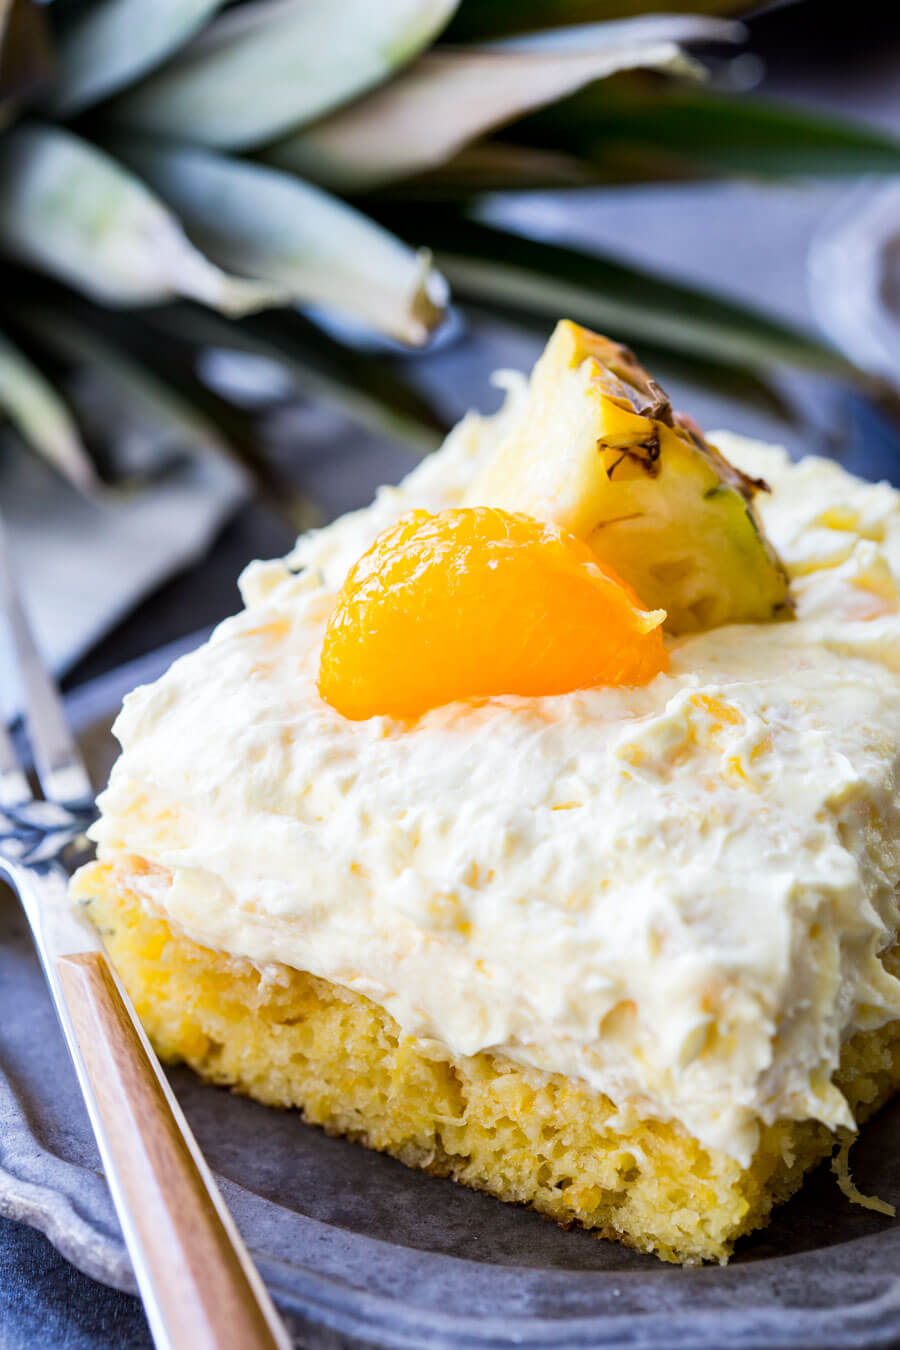 Mandarin Orange Cake with Pineapple fluff frosting or pig pickin' cake is delicious yellow cake with fruity highlights